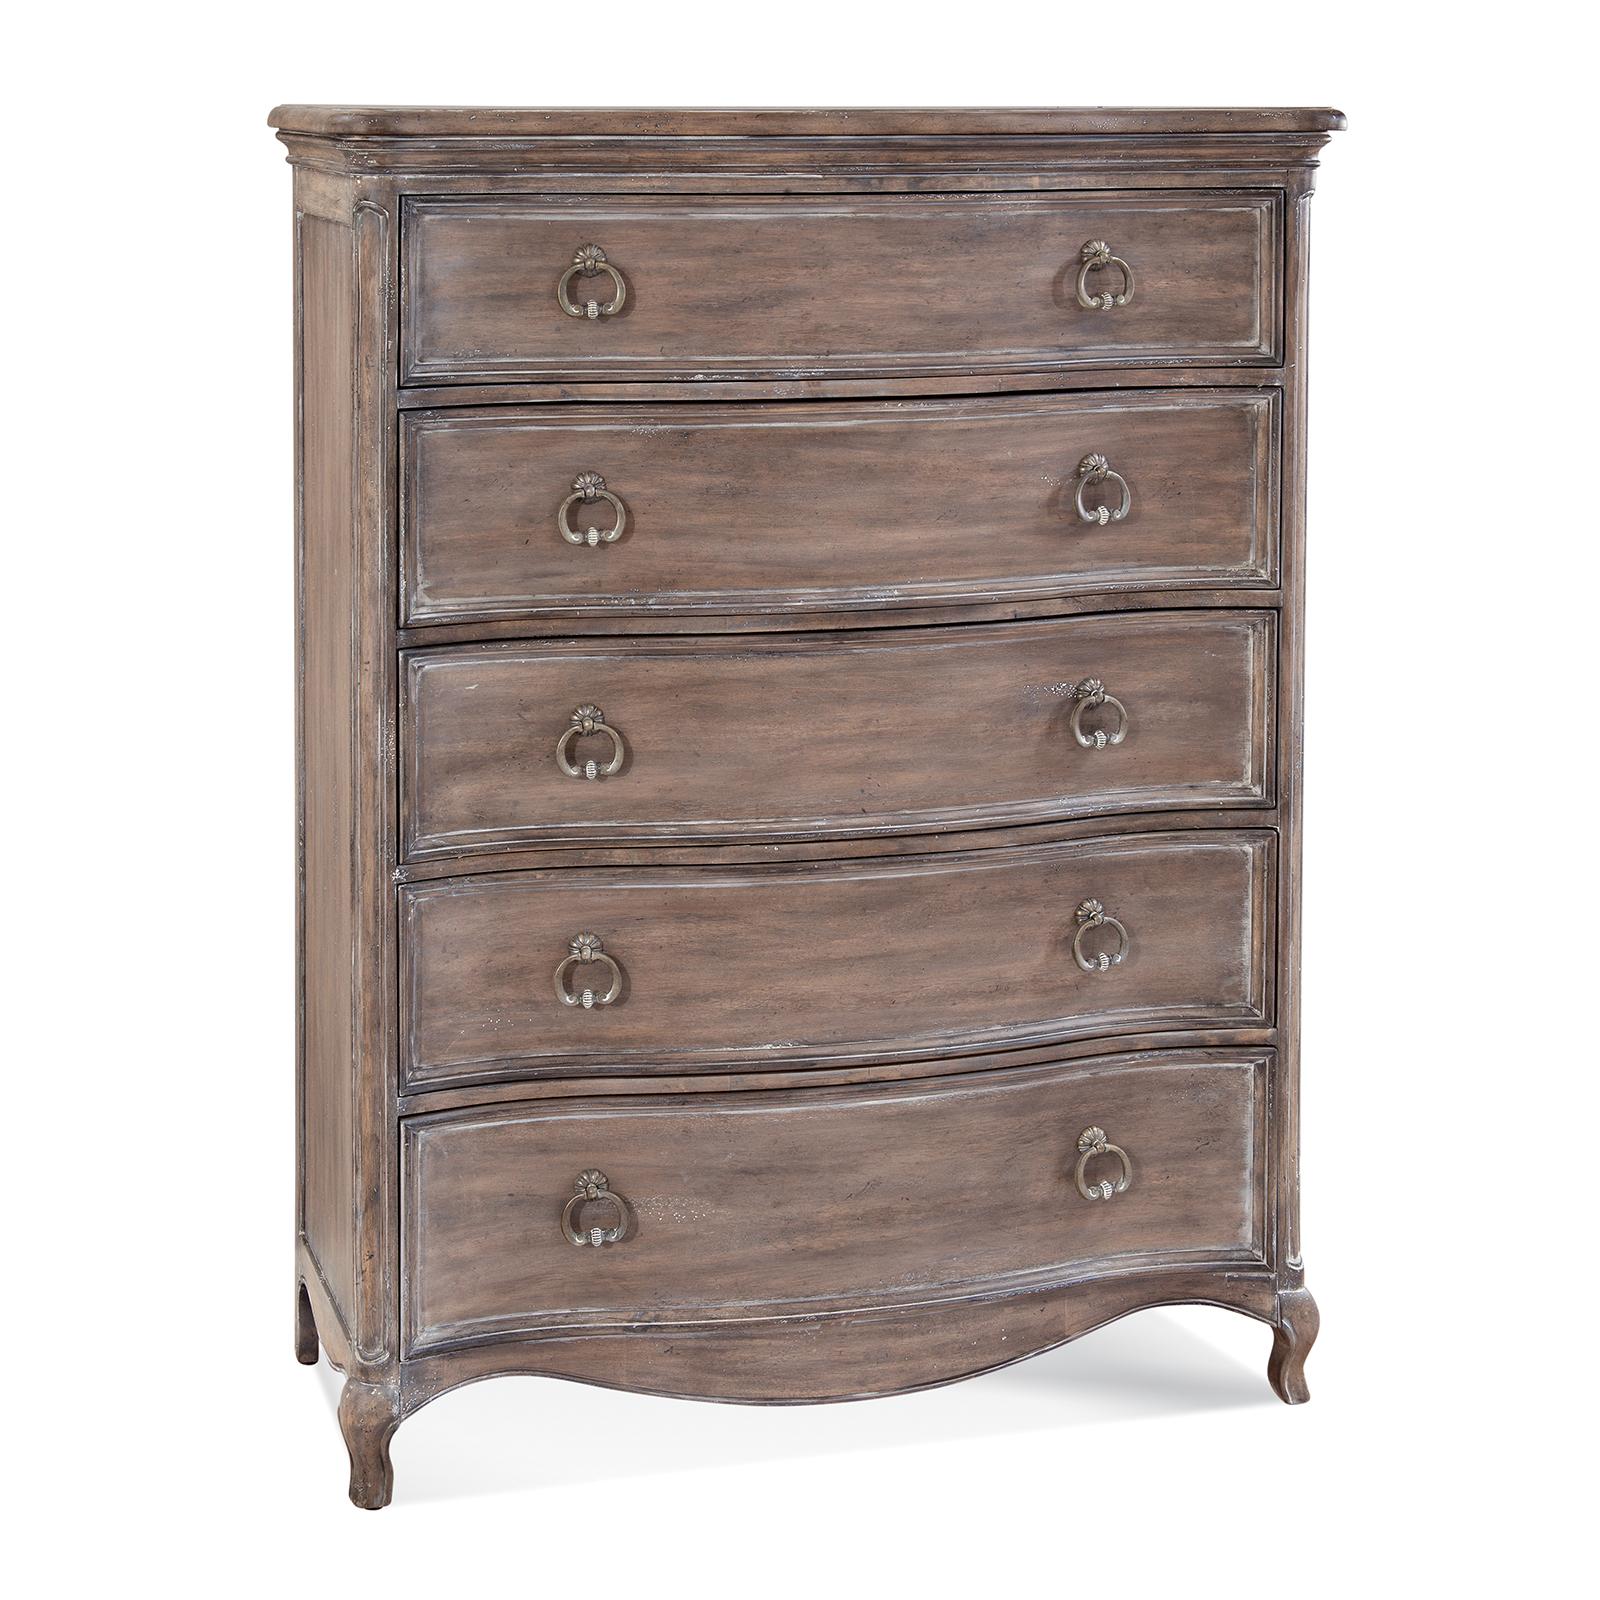 Classic, Traditional Chest 1575-150 1575-150 in Antique, Gray 